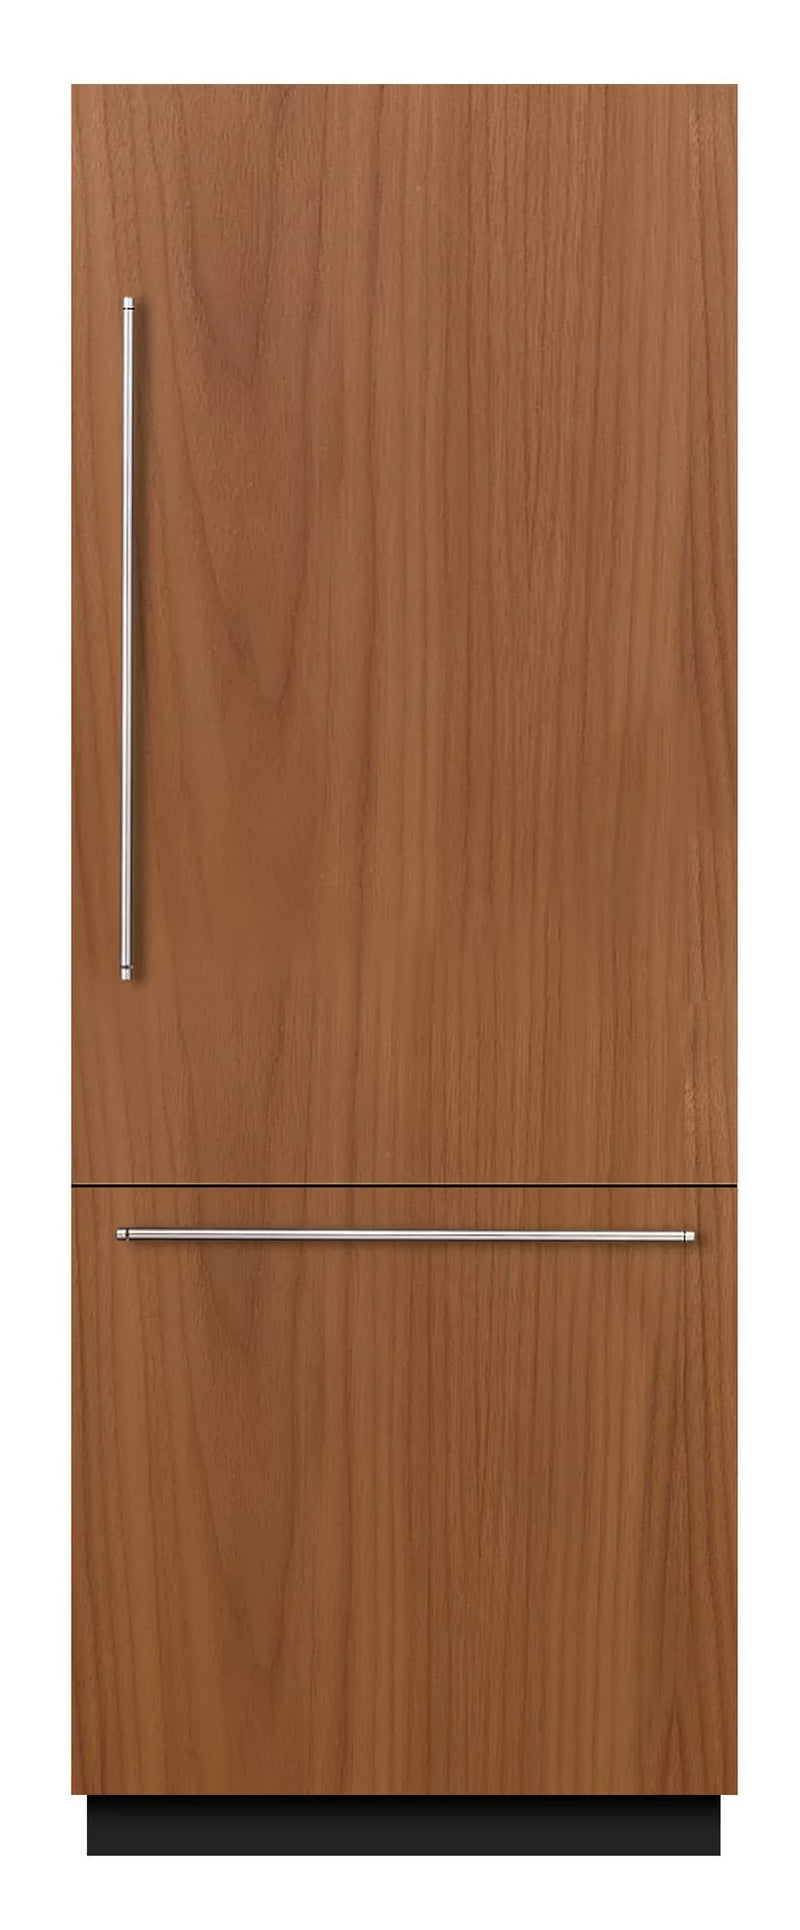 Bosch - 30 Inch 16 cu. ft Built In / Integrated Bottom Mount Refrigerator in Panel Ready - B30IB800SP